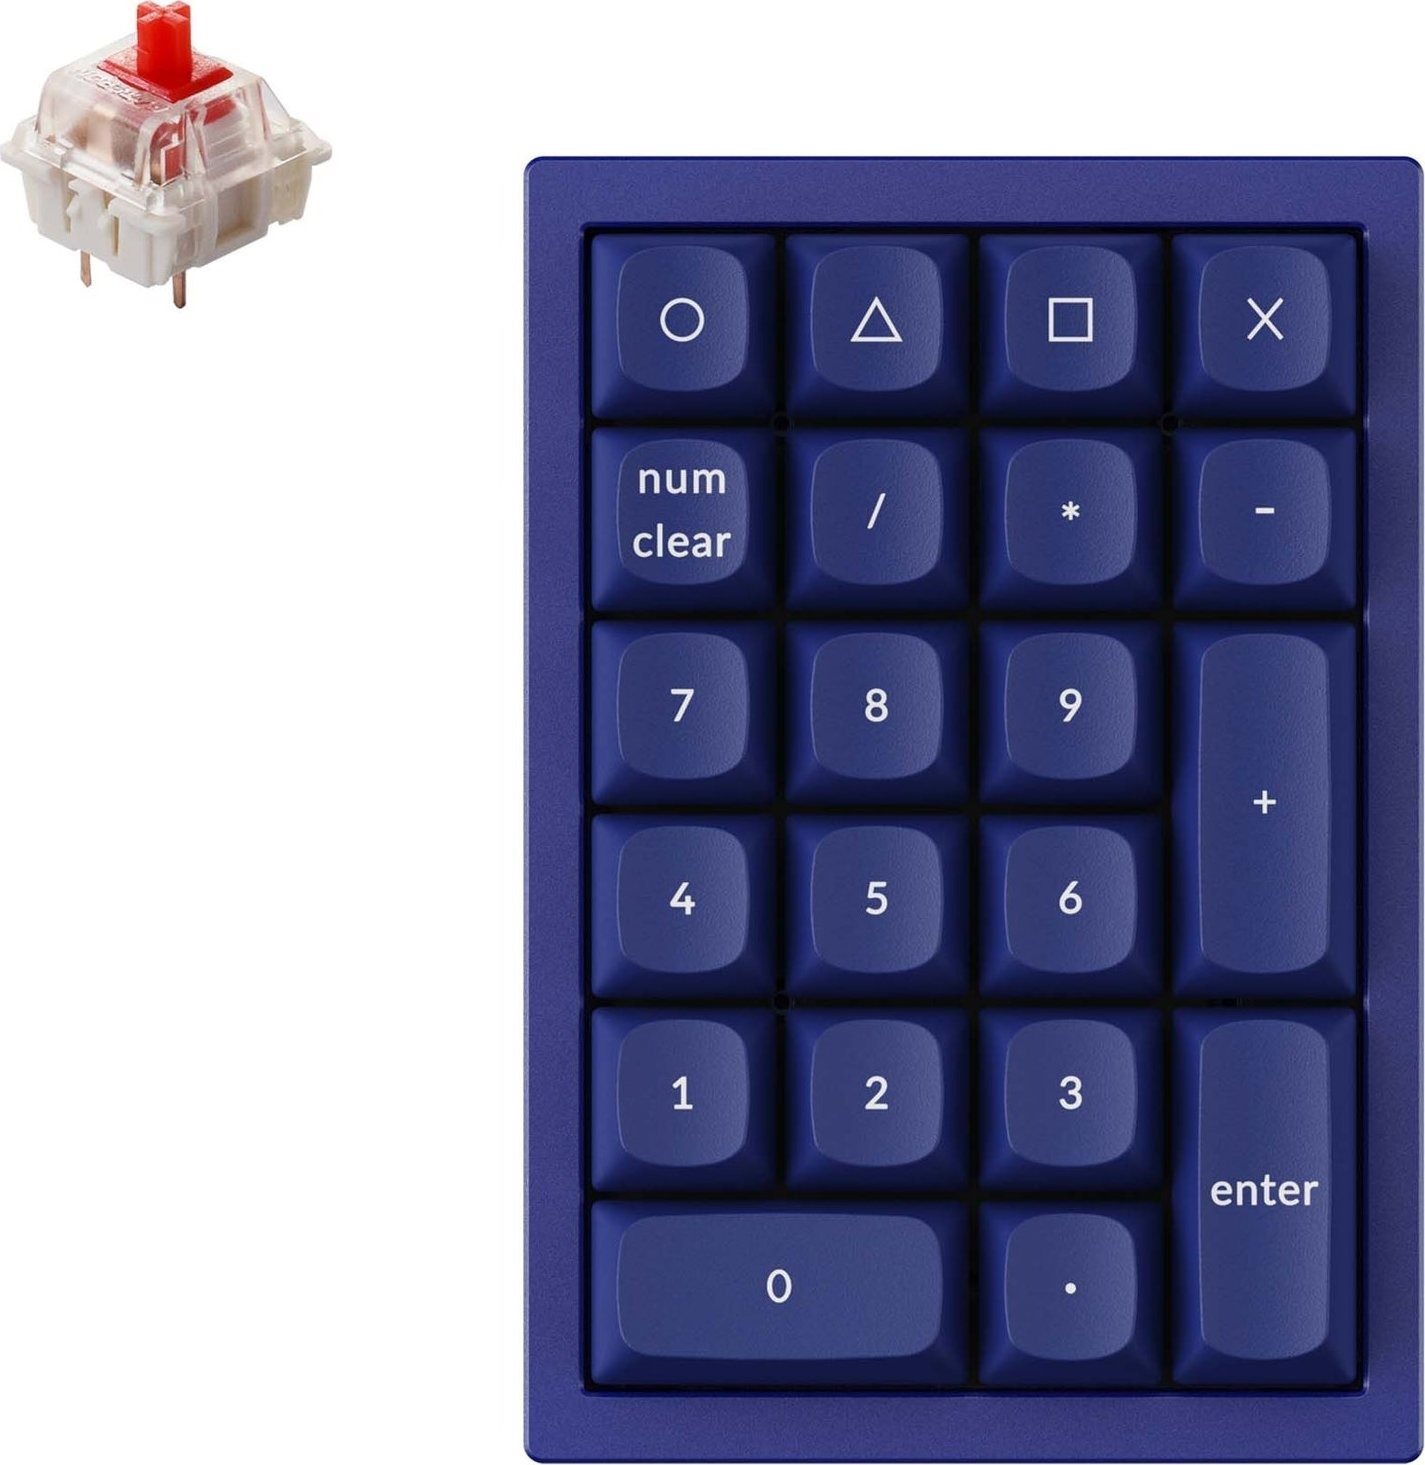 Keychron QMK Q0 Hot-Swappable Number Pad RGB Gateron G Pro Red Switch Mechanical - Blue Version